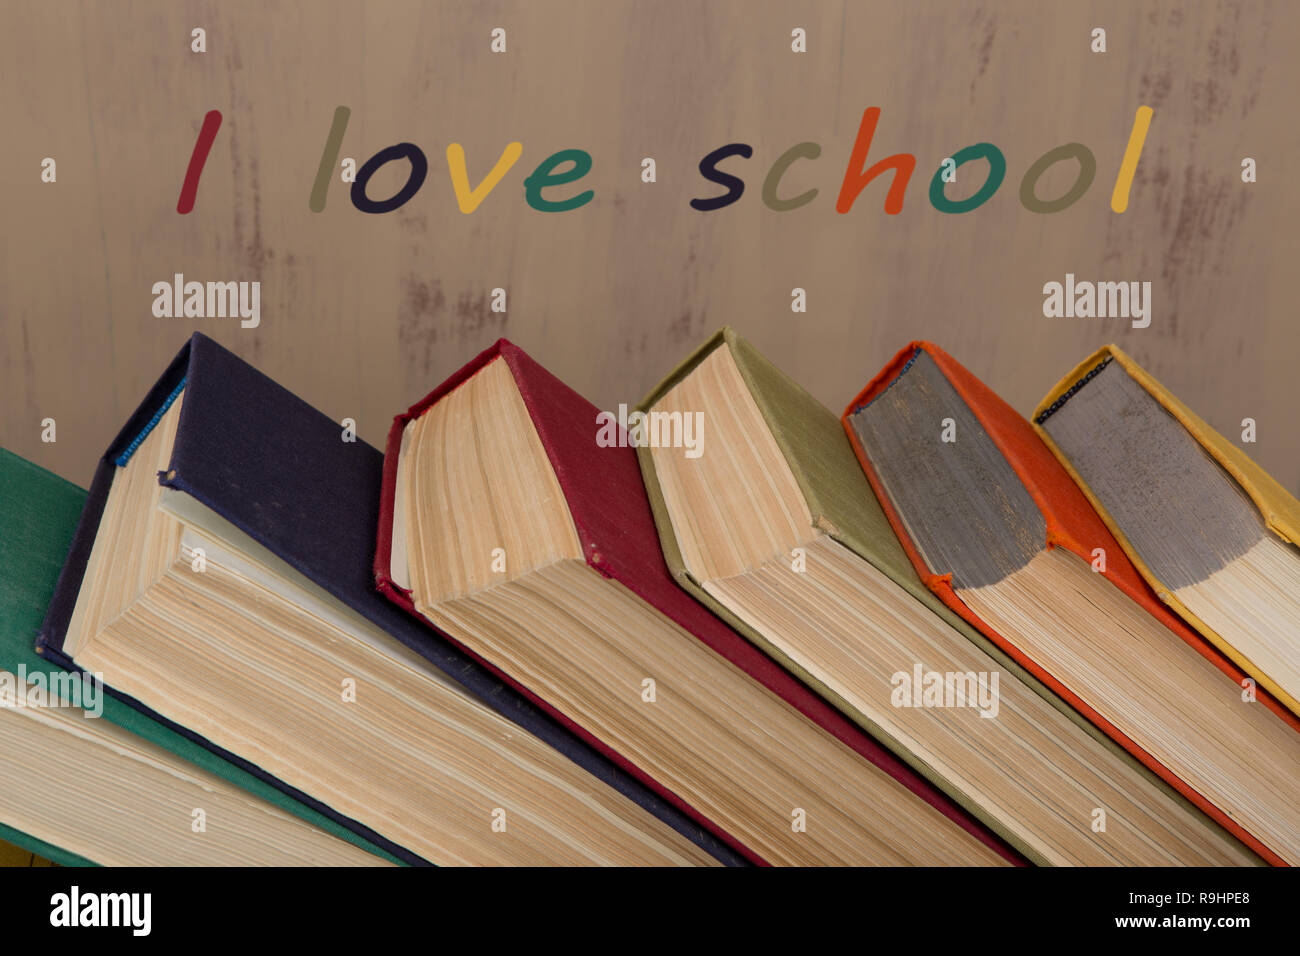 Back to school and education concept - colorful hardback books on brown background with text 'I love school' Stock Photo